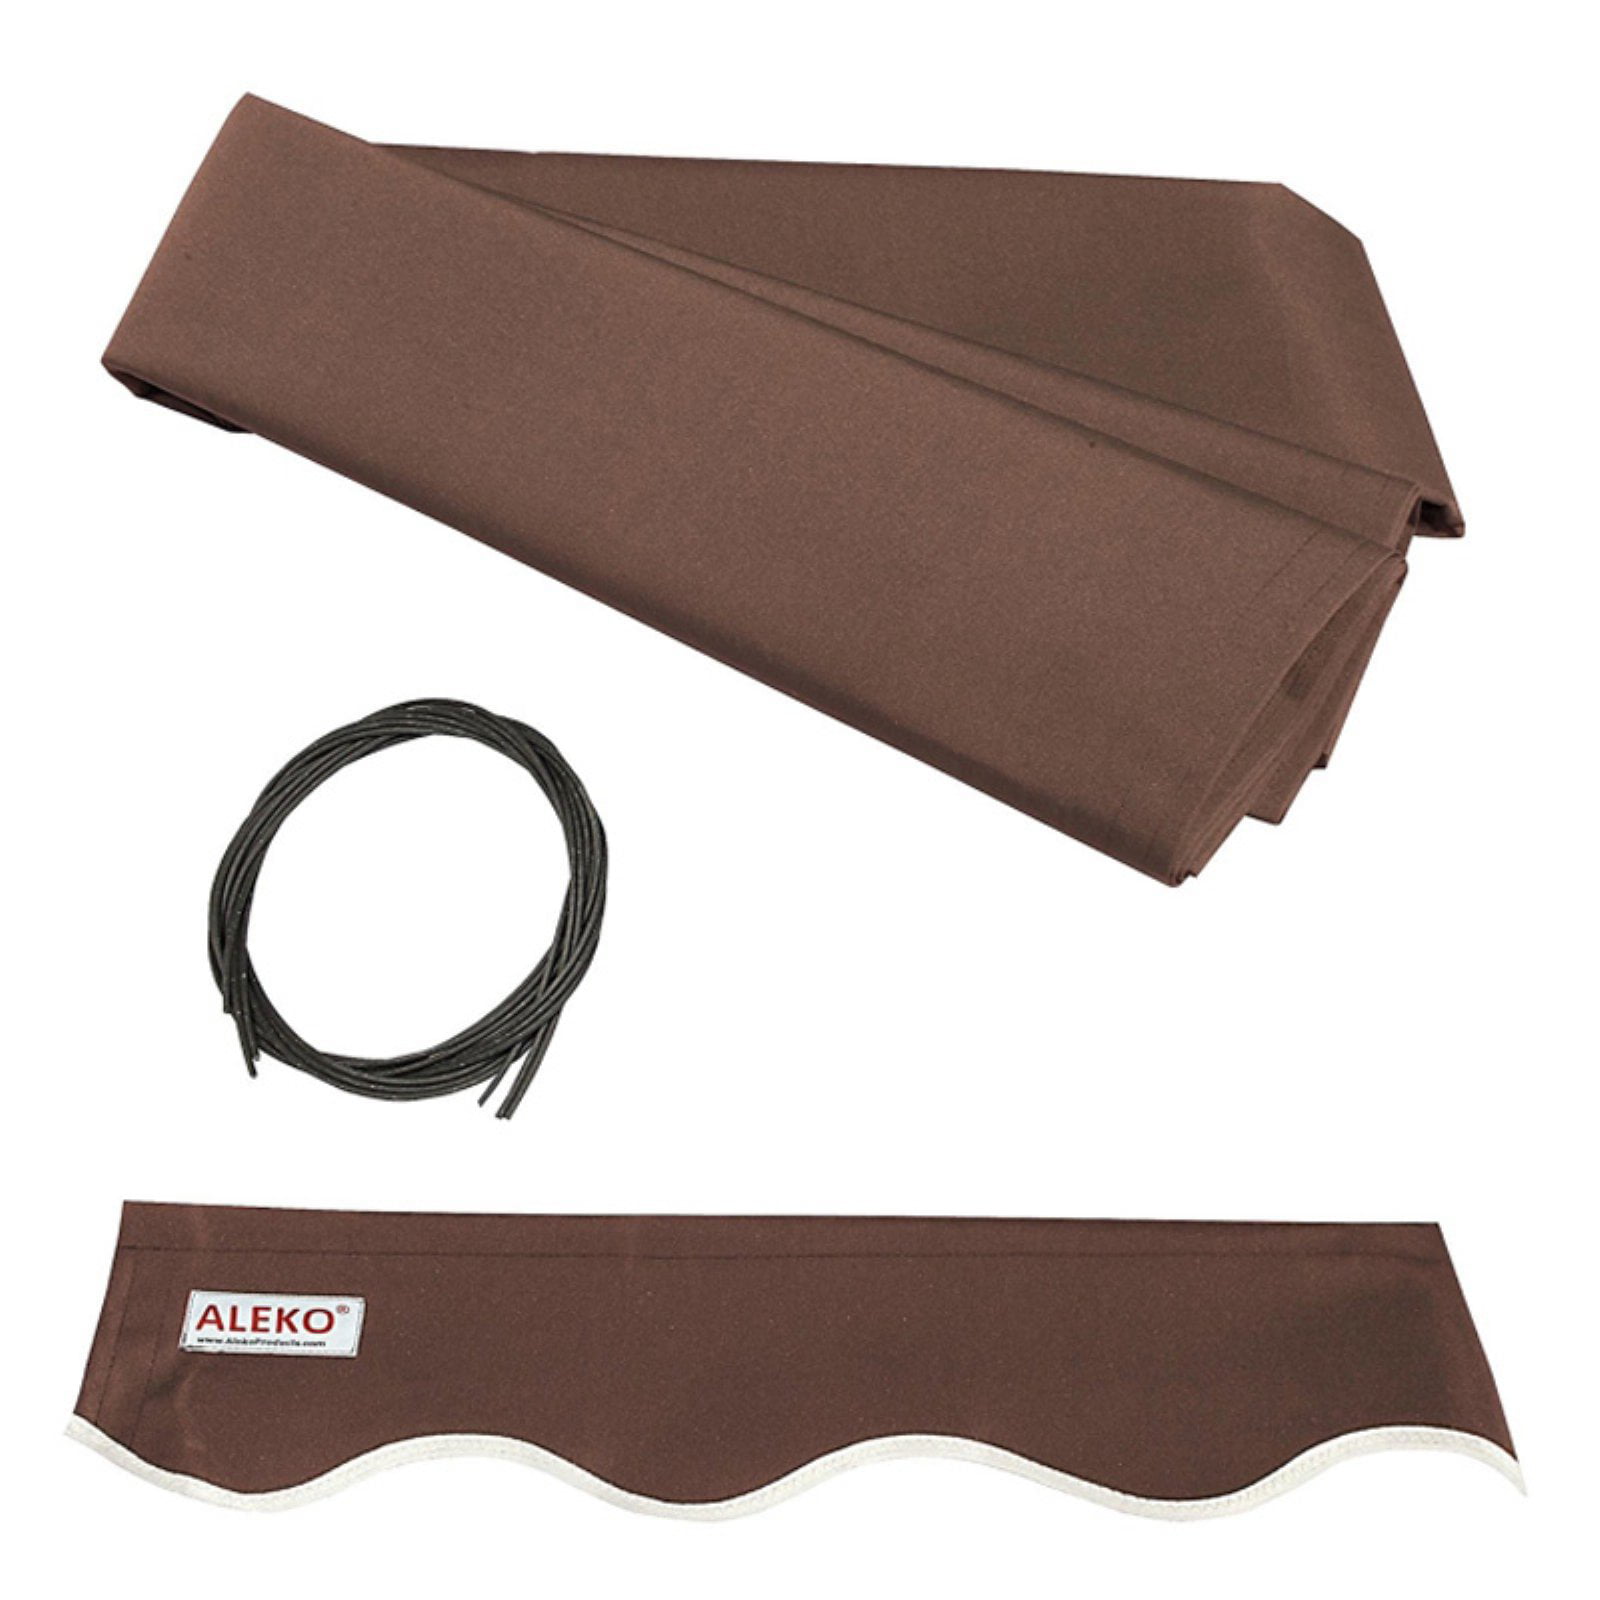 ALEKO Replacement Brown Color Fabric for Retractable Awnings 12'x10' 